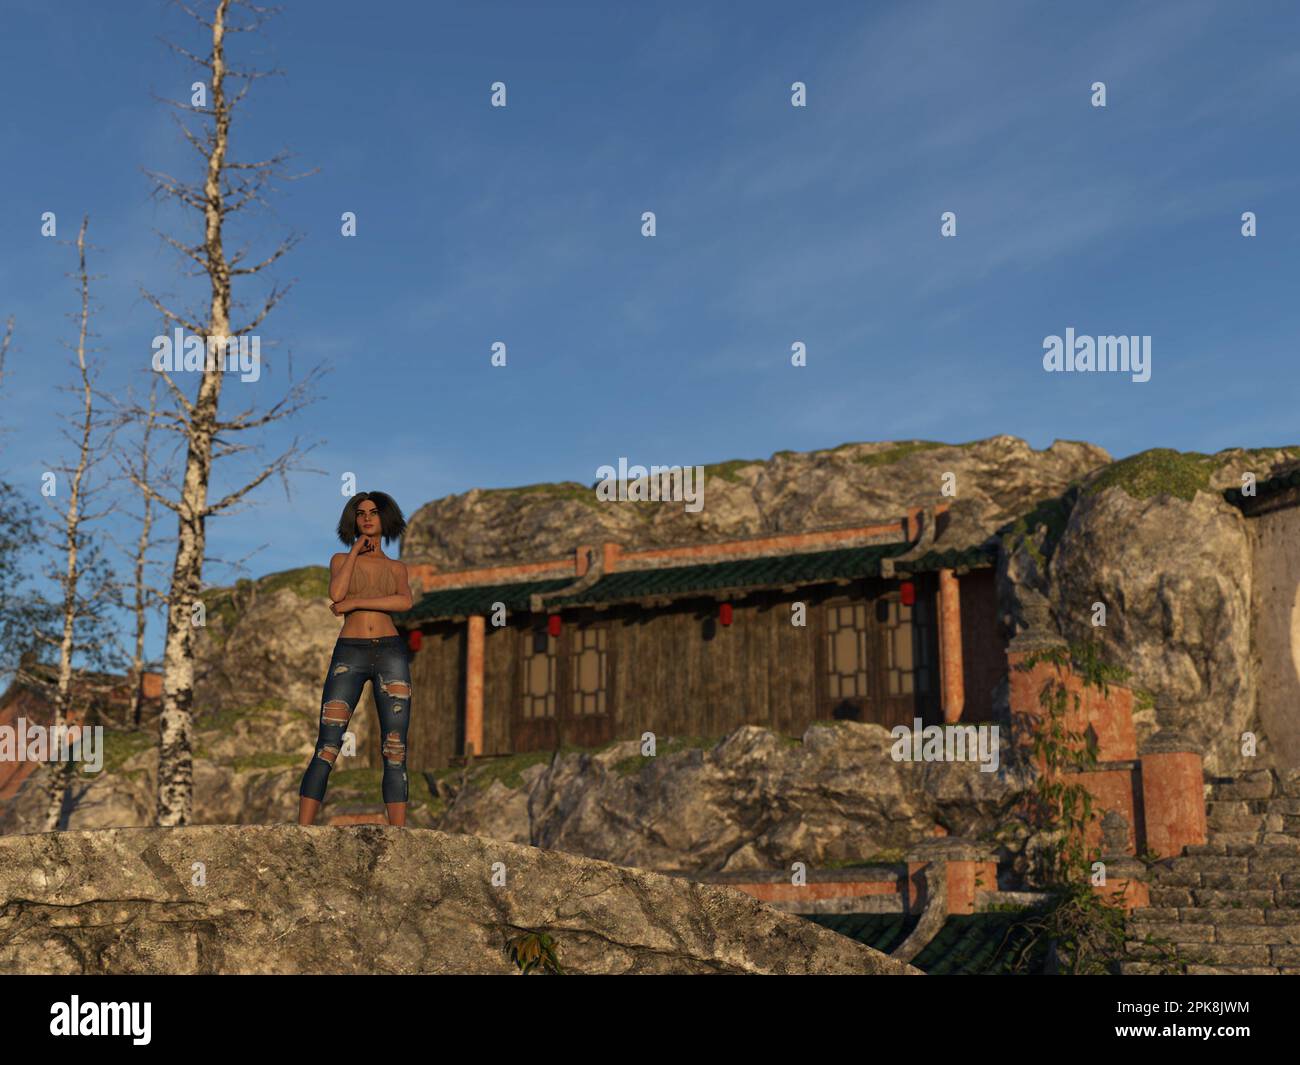 3d illustration of a woman wearing torn jeans and a halter top standing on boulders in front of an old house. Stock Photo